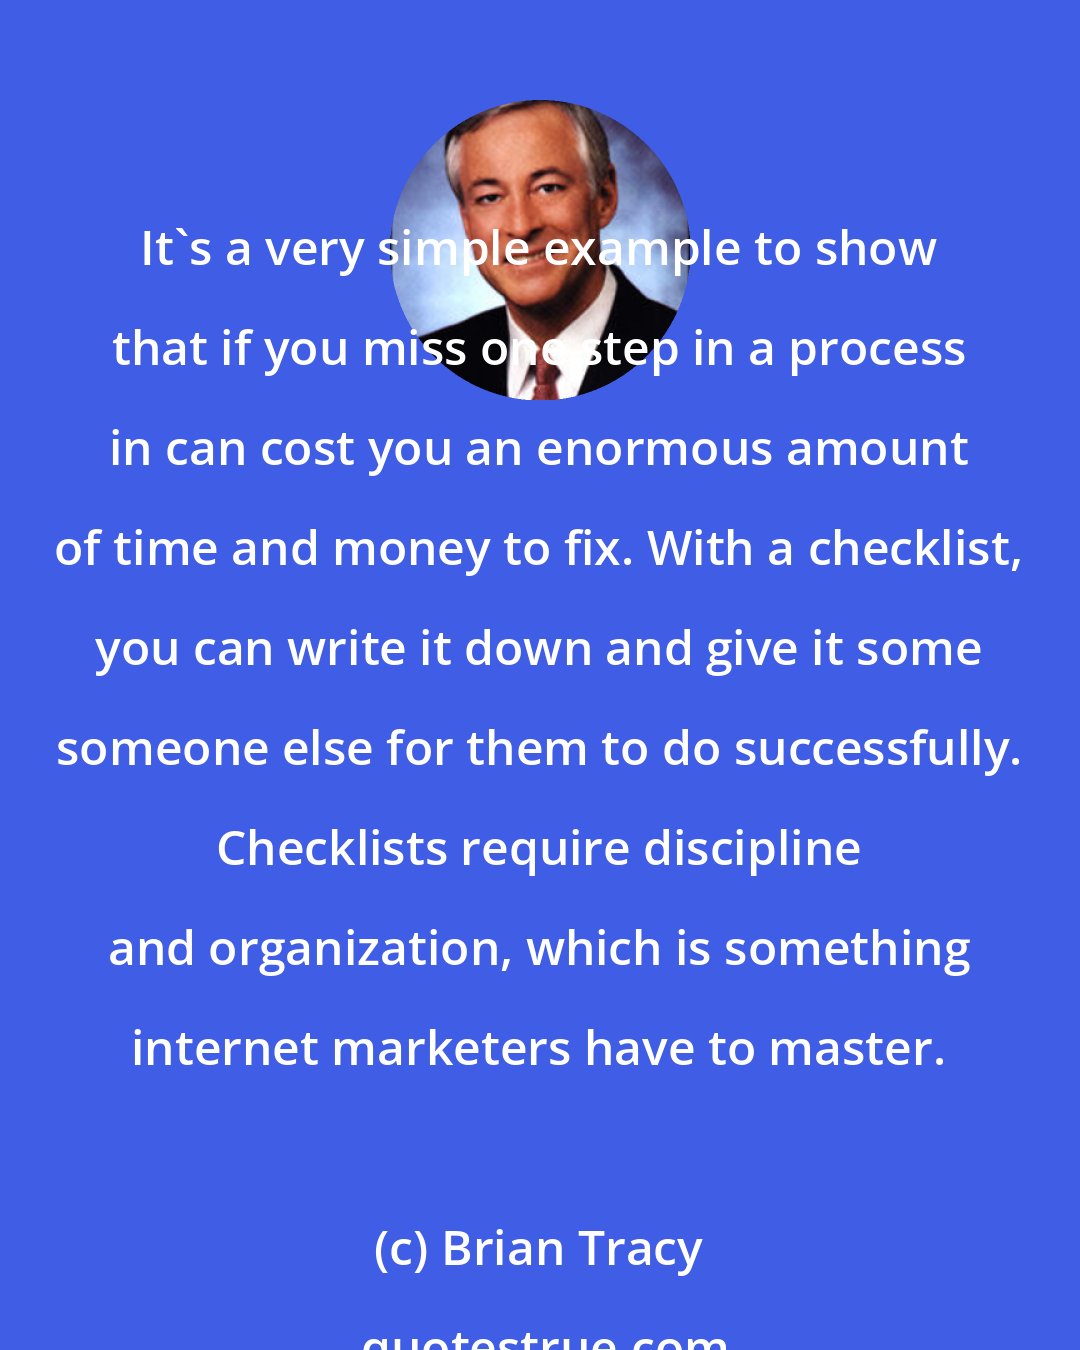 Brian Tracy: It's a very simple example to show that if you miss one step in a process in can cost you an enormous amount of time and money to fix. With a checklist, you can write it down and give it some someone else for them to do successfully. Checklists require discipline and organization, which is something internet marketers have to master.